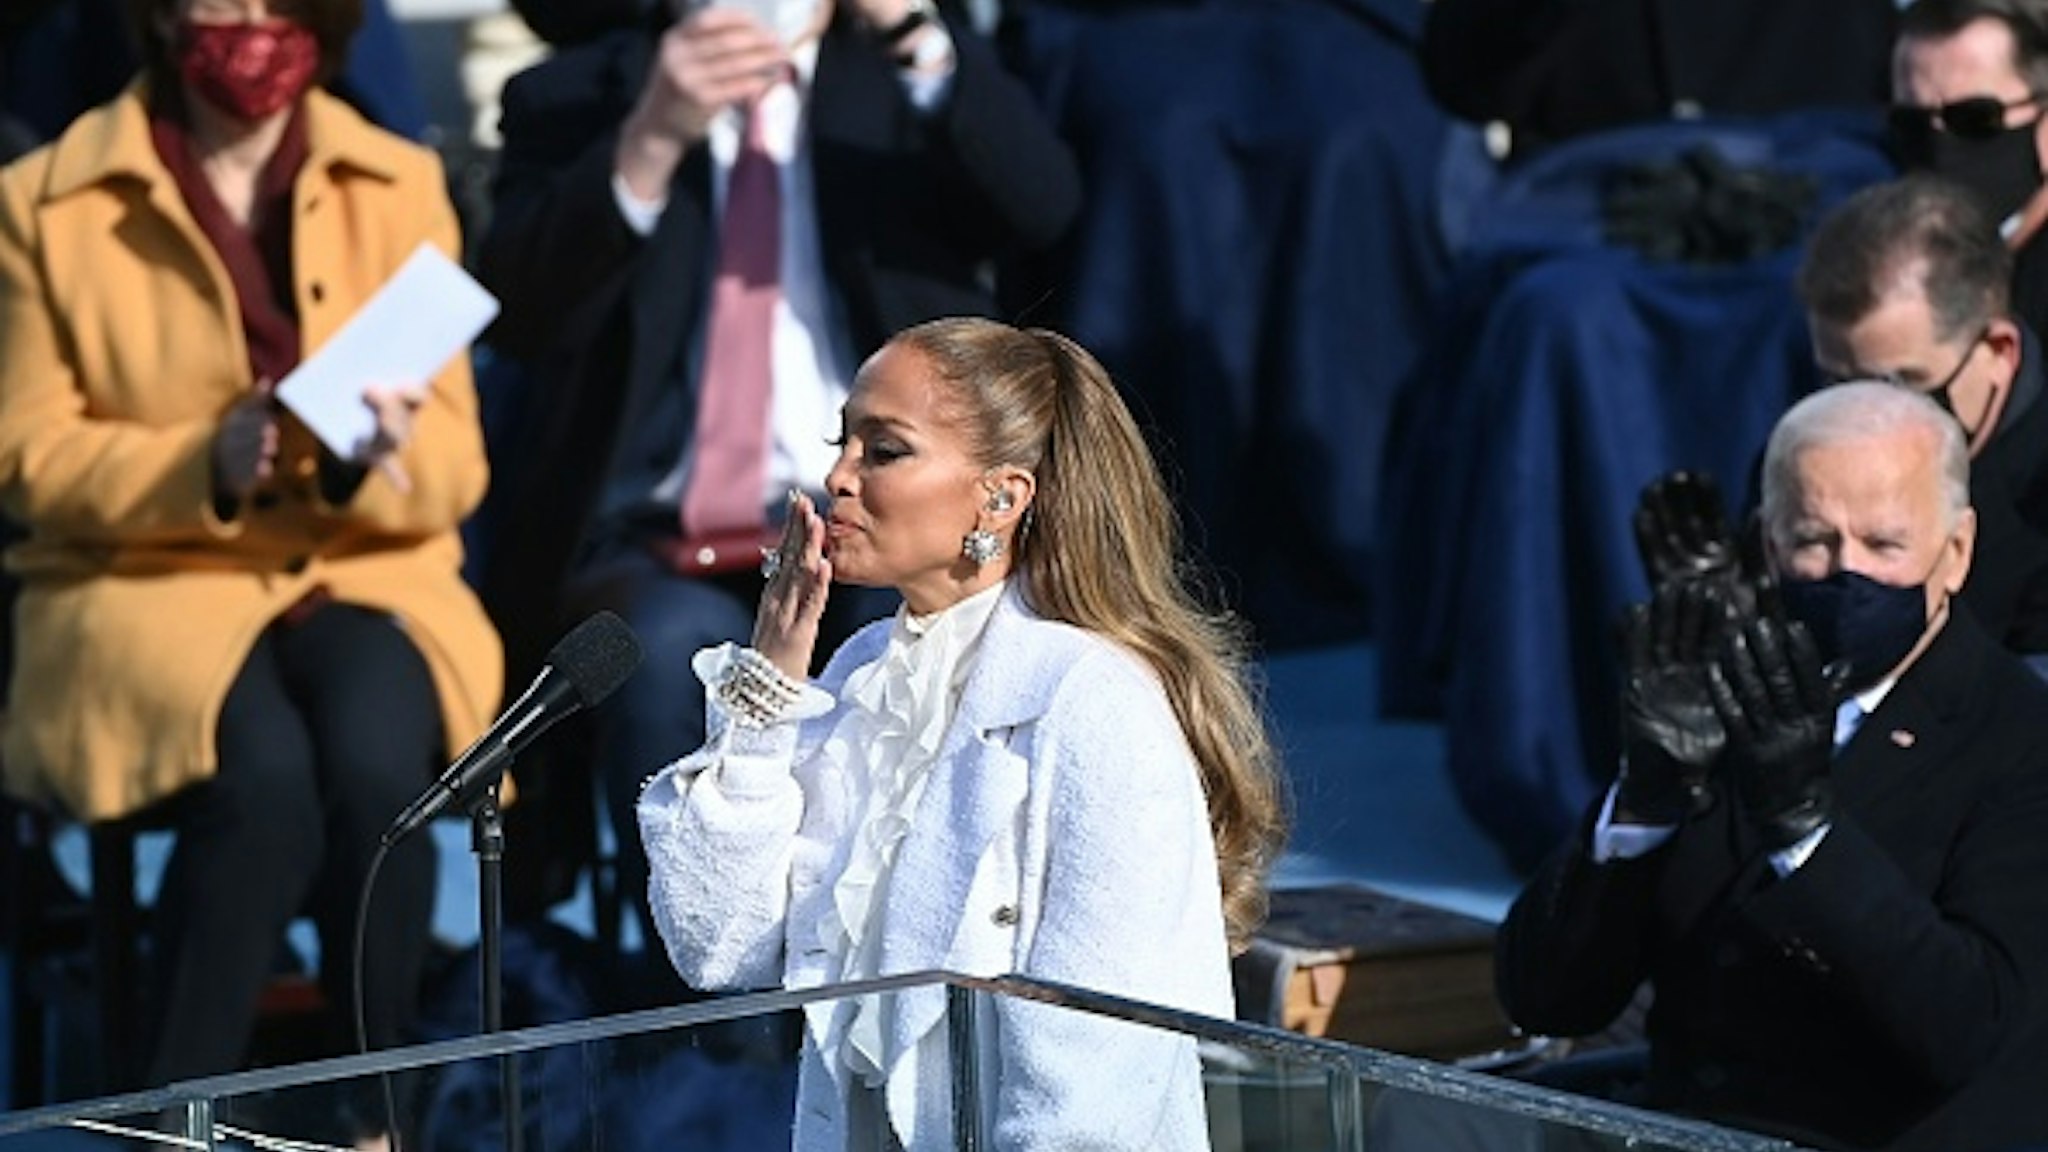 Jennifer Lopez blows a kiss after performing in front of Joe Biden (R) at the 59th Presidential Inaguruation on January 20, 2021, at the US Capitol in Washington, DC.